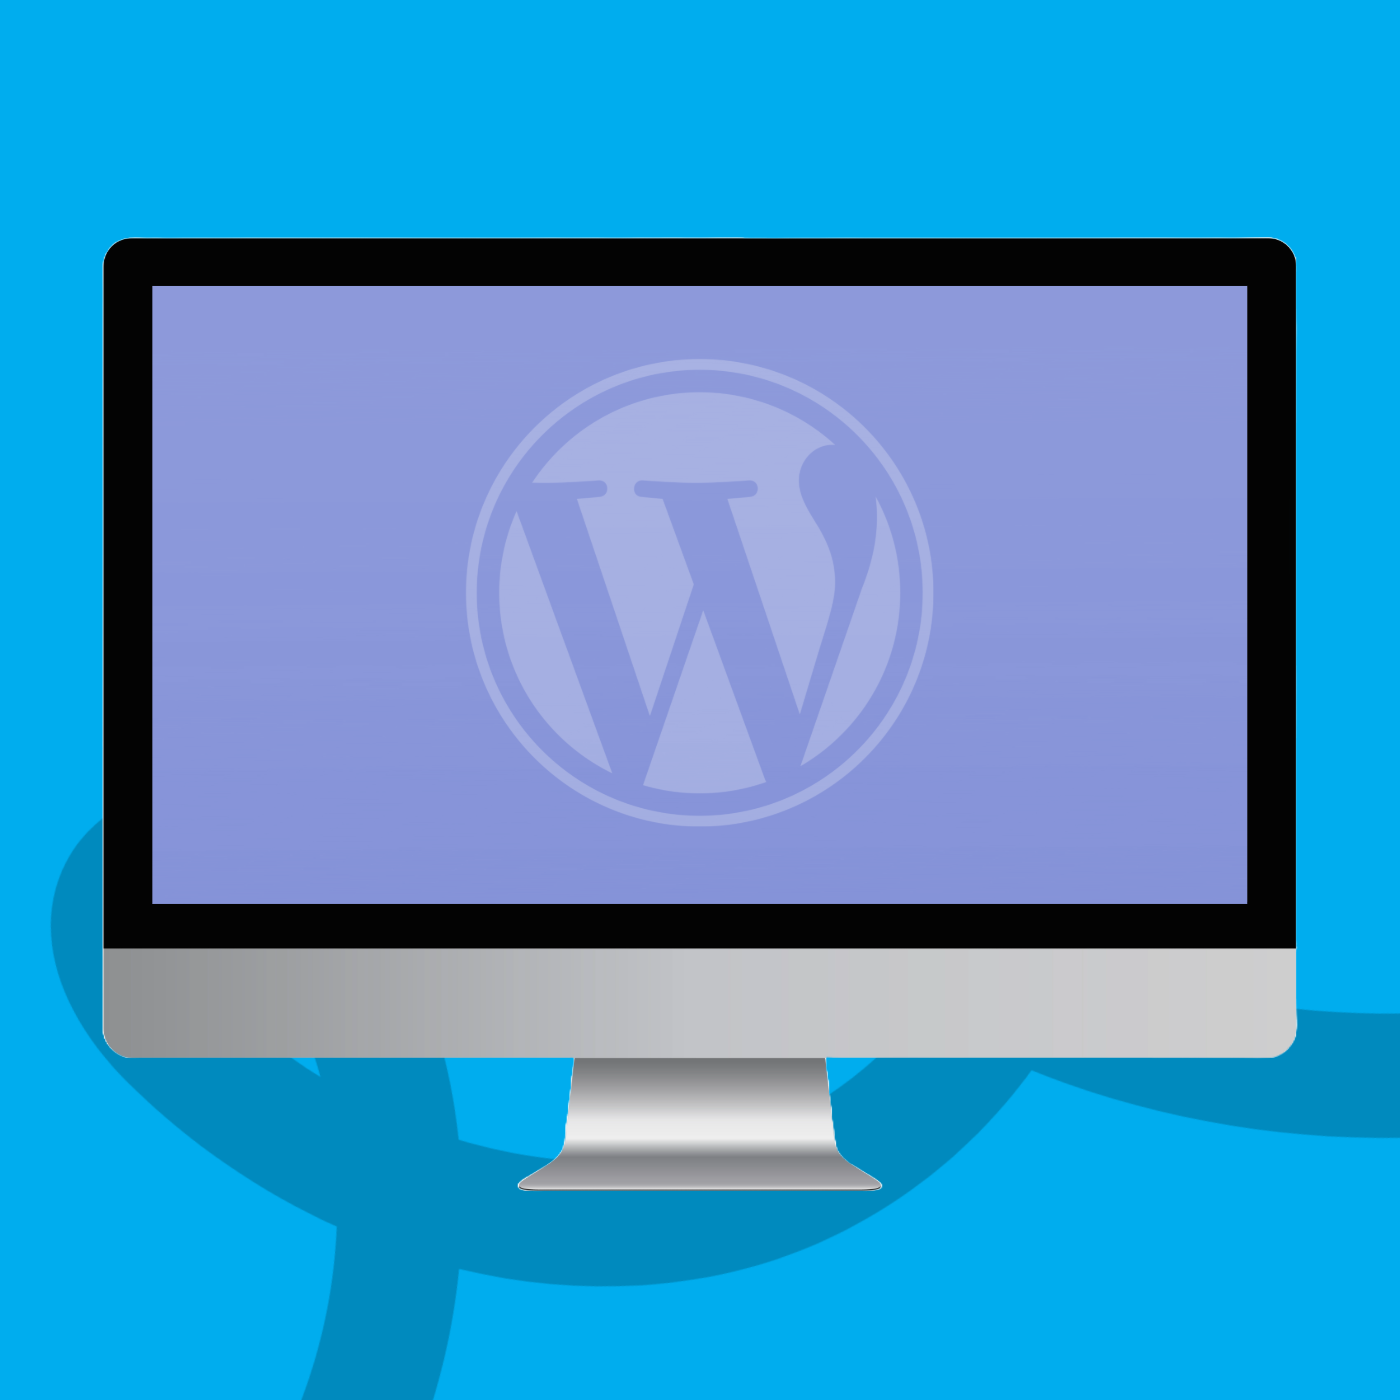 Desk with an iMac on, within the screen is a blue gradient and the WordPress logo.